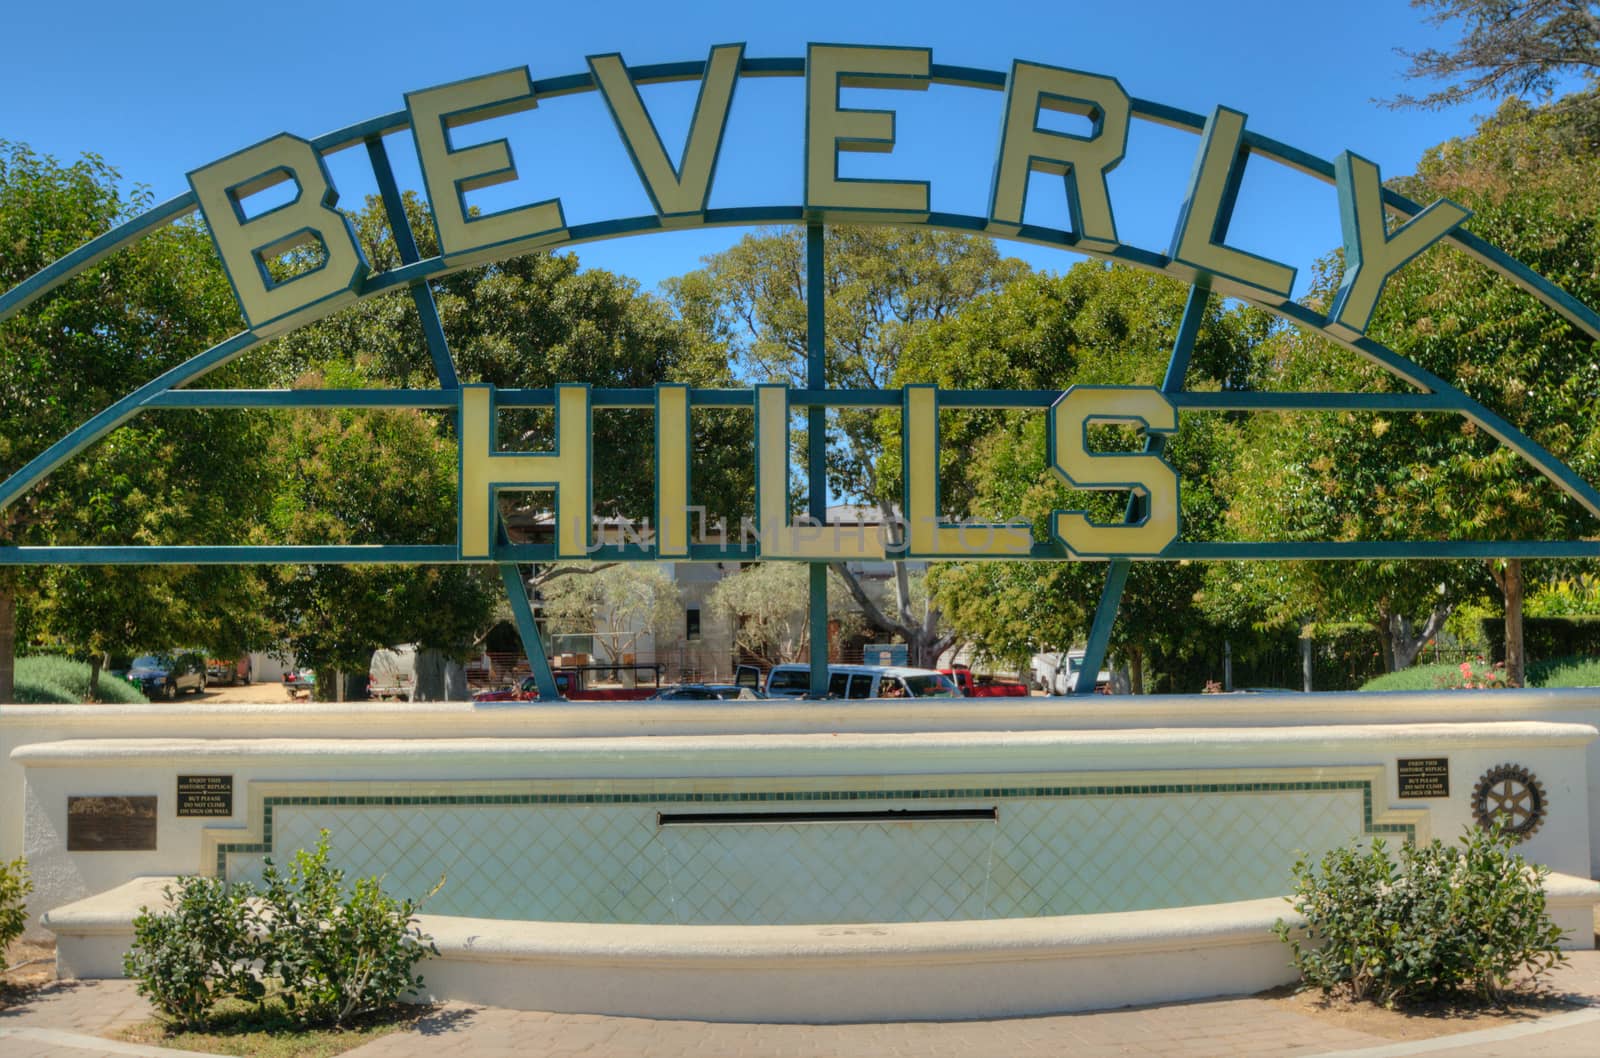 Beverly Hills sign on rodeo drive view into the Los Angeles hills on AUGUST 23, 2013 in Los Angeles, USA.